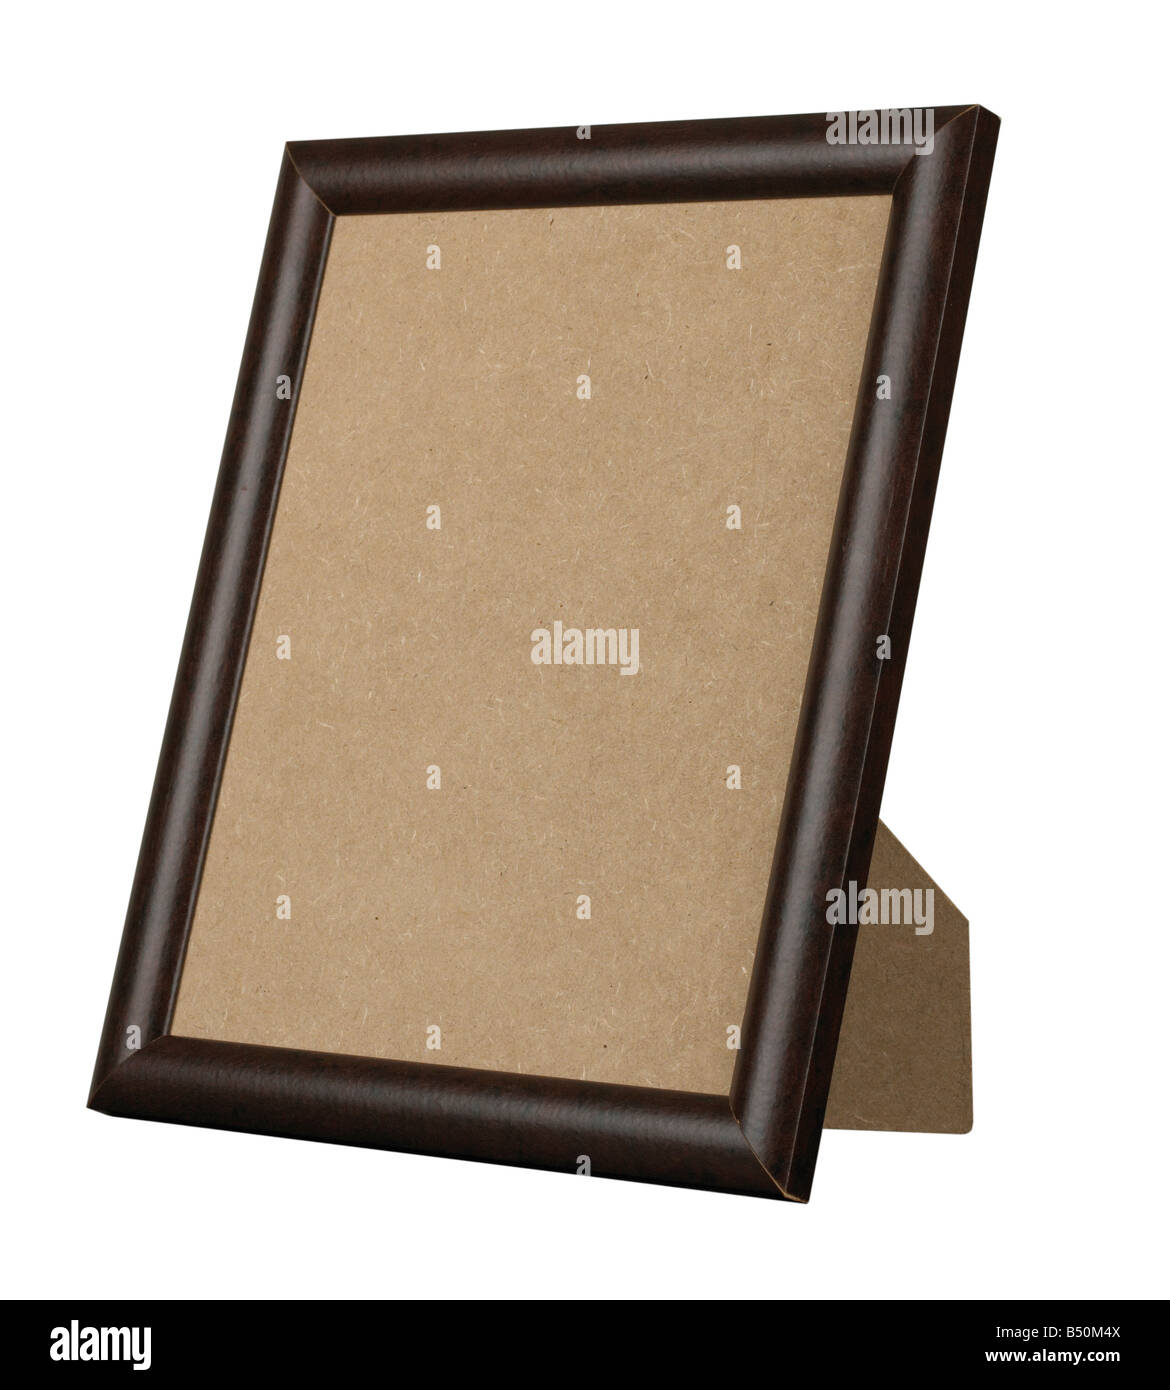 DARK WOOD PICTURE FRAME STANDING UPRIGHT Stock Photo